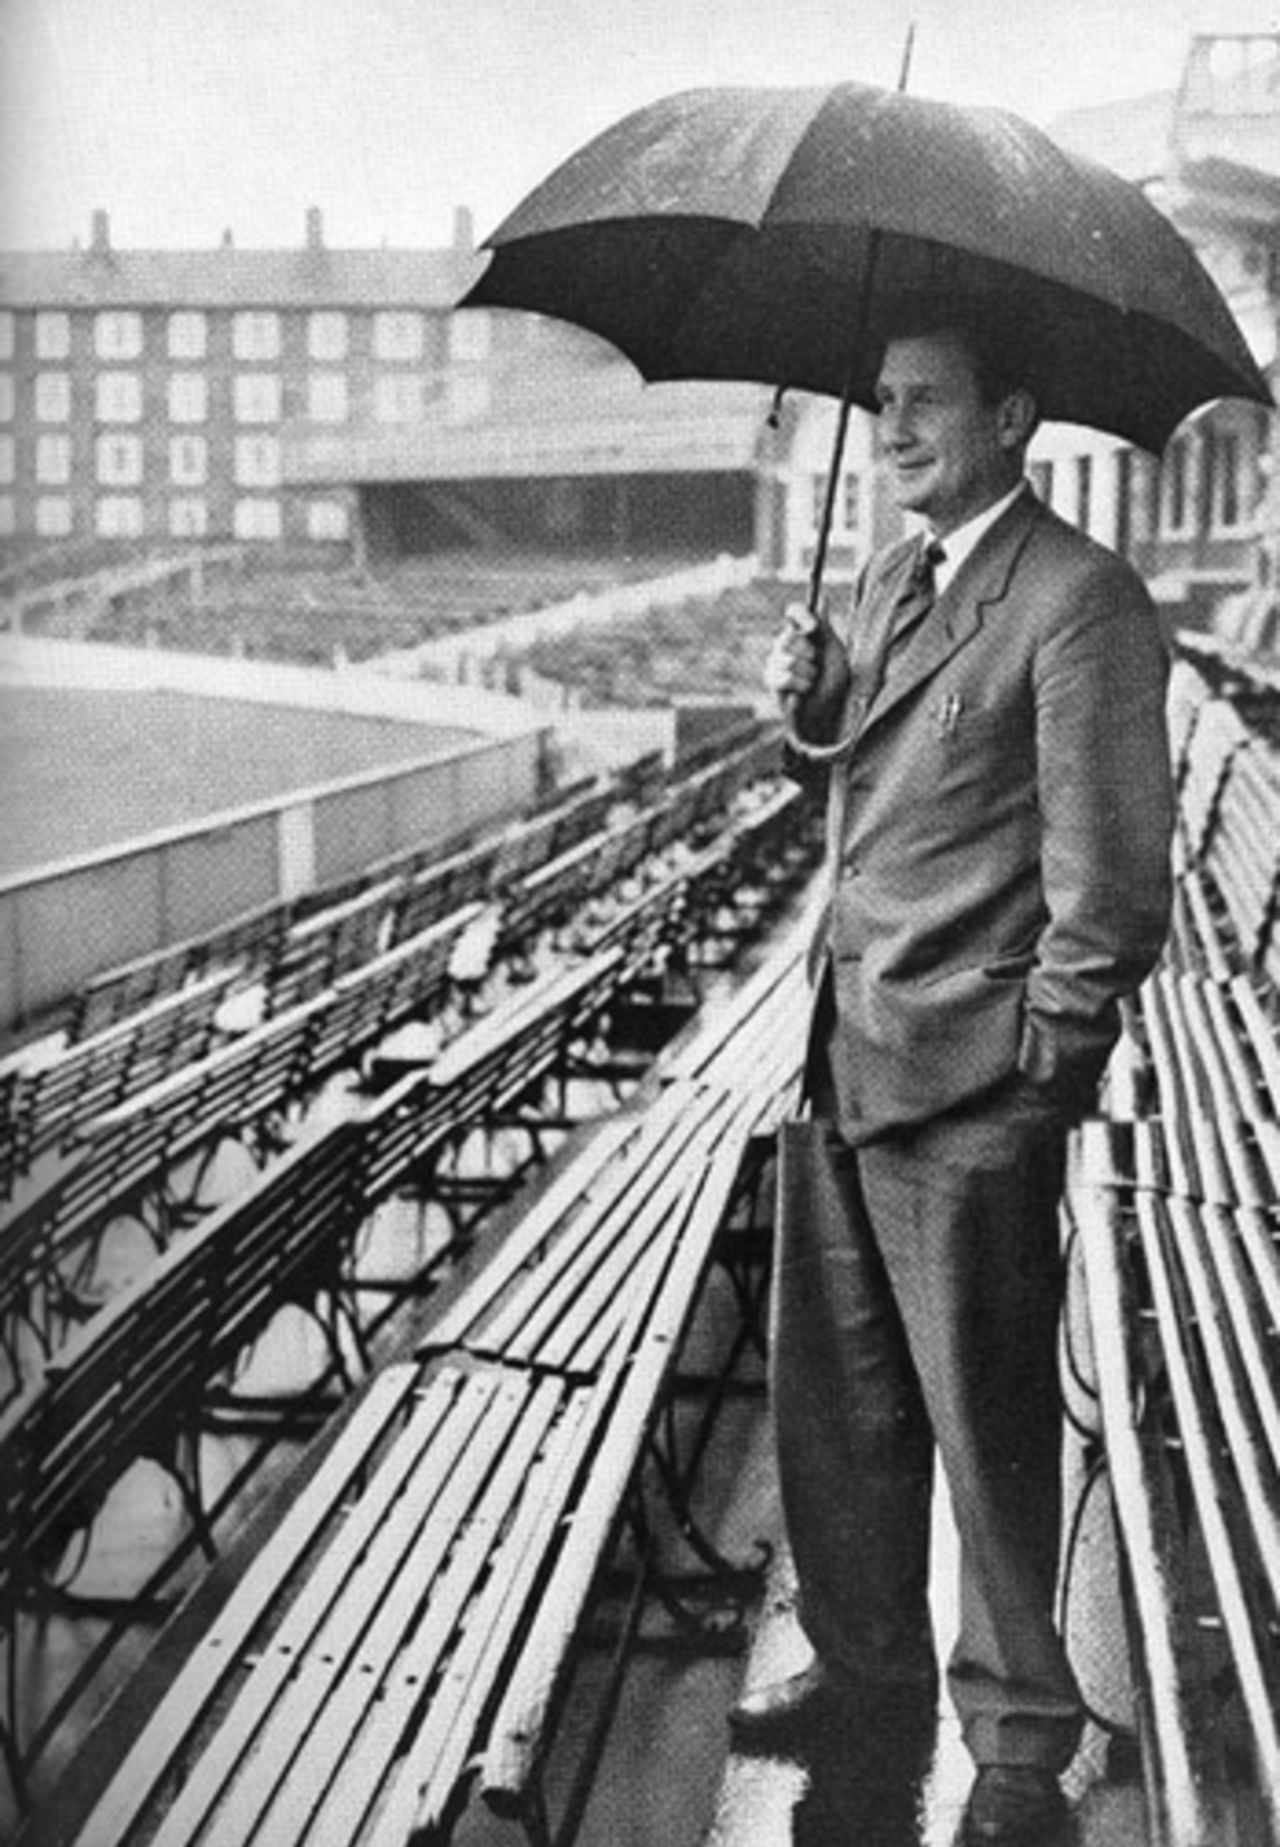 Jim Laker ruefully looks across The Oval as his benefit match is washed out, 1956